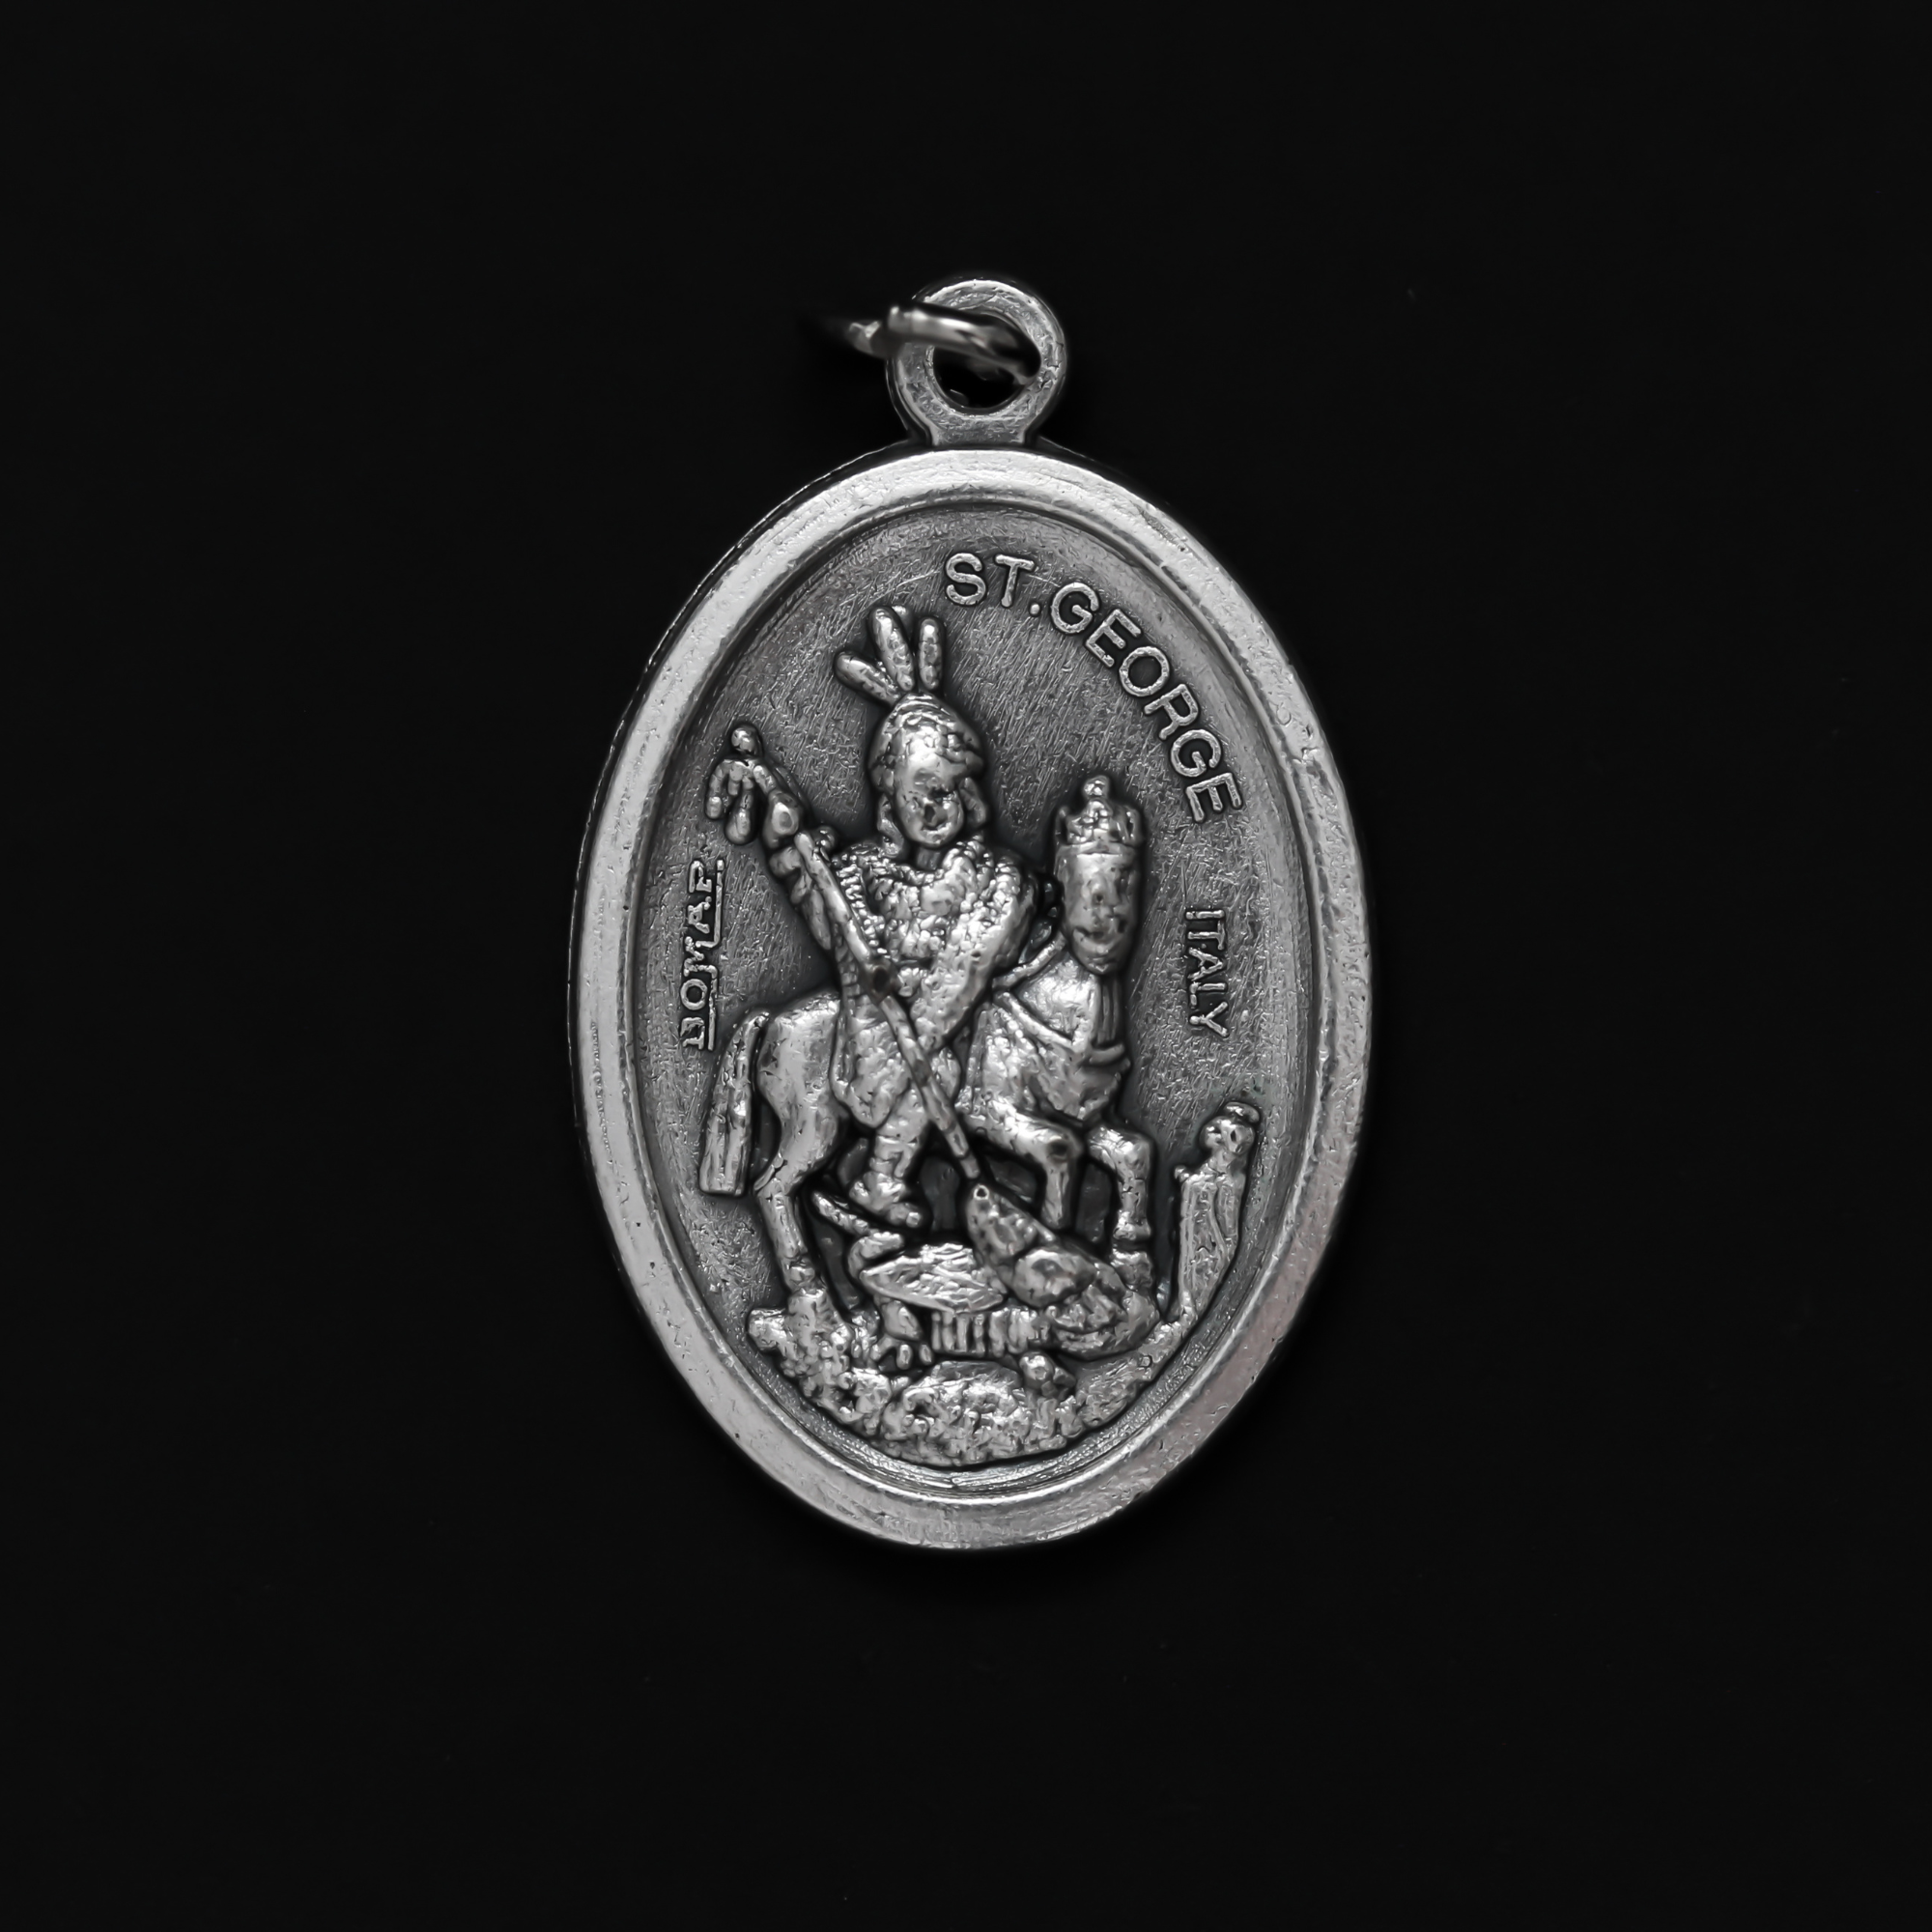 Saint George Medal - Patron of Boy Scouts, Soldiers, Invoked Against the Plague